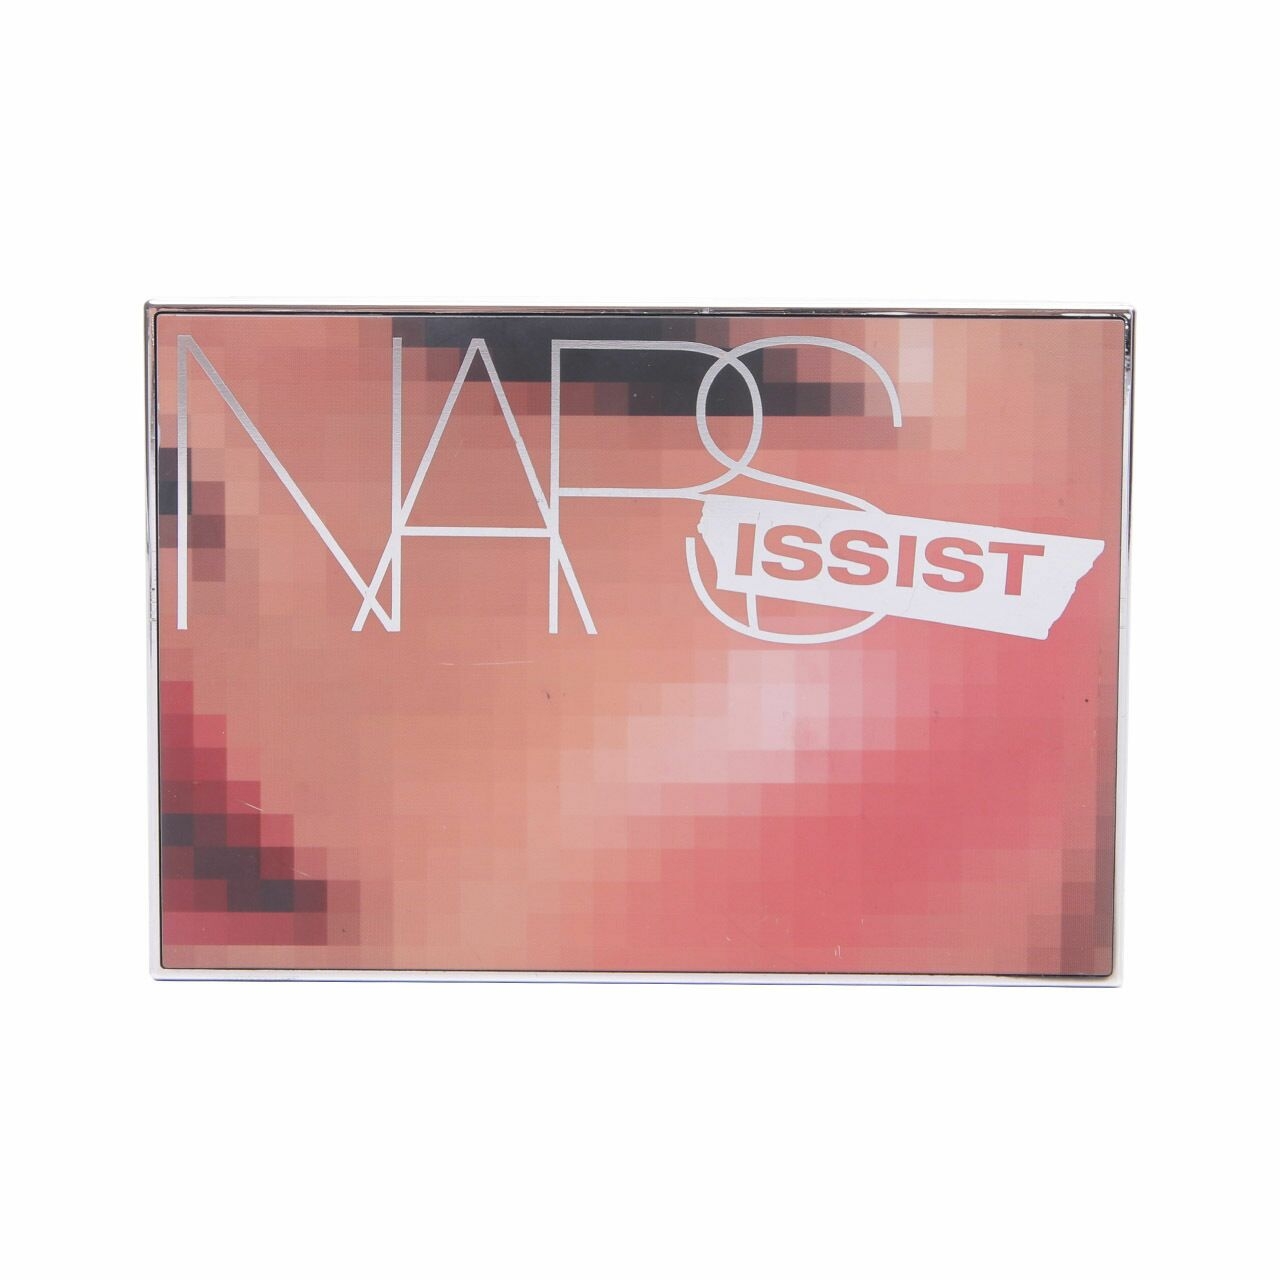 Nars Narsissist Shade II Wanted Cheek Palette Sets and Palette